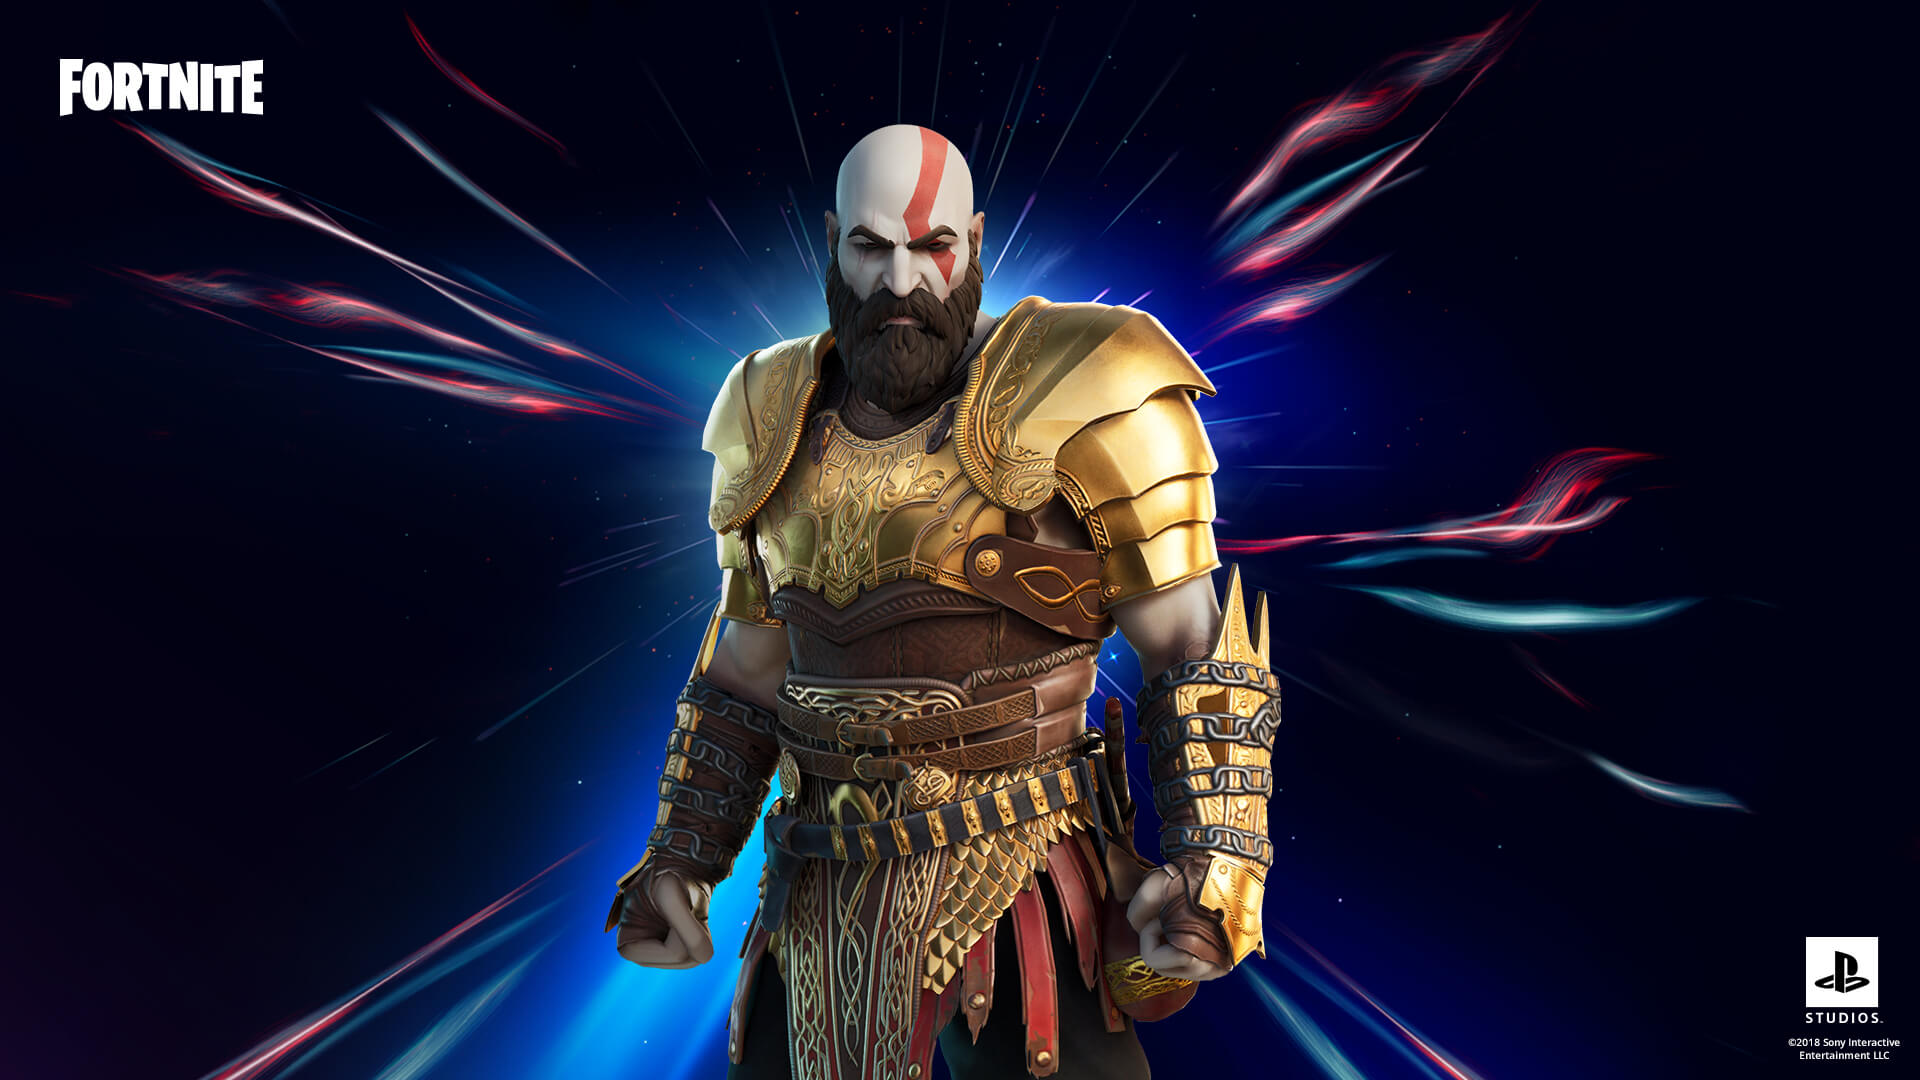 Update Now Available Kratos From God Of War Coming Is To Fortnite In Chapter 2 Season 5 According To New Leak Mysmartprice